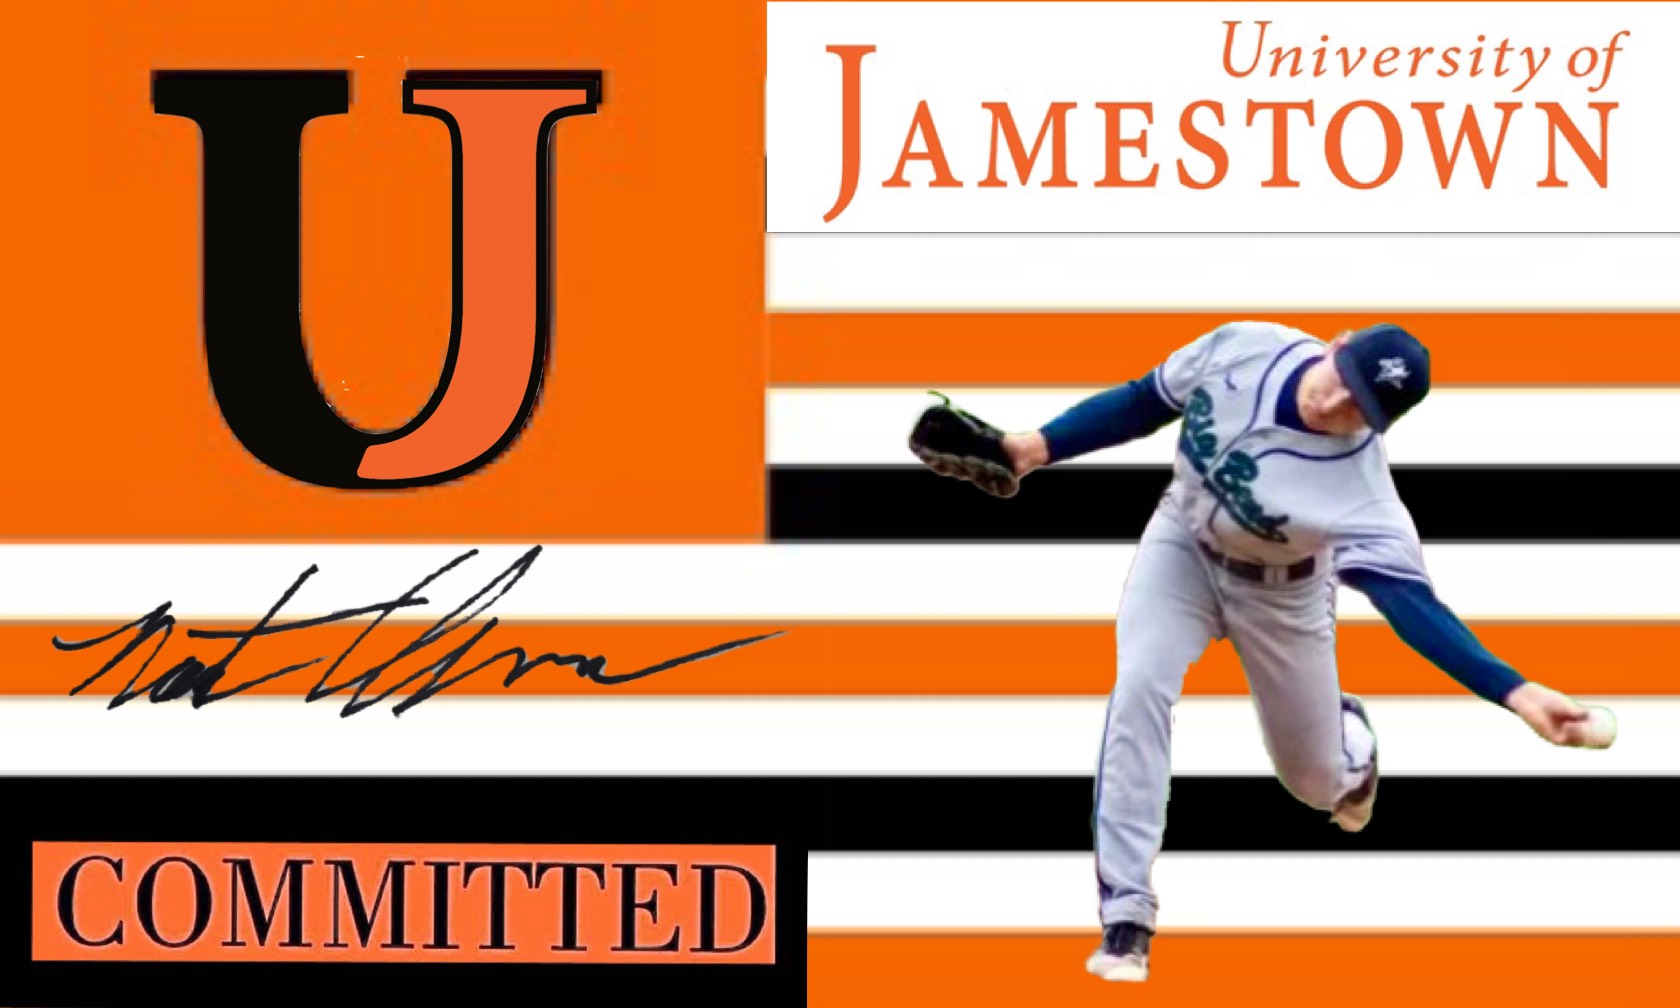 Akesson Commits to The University of Jamestown